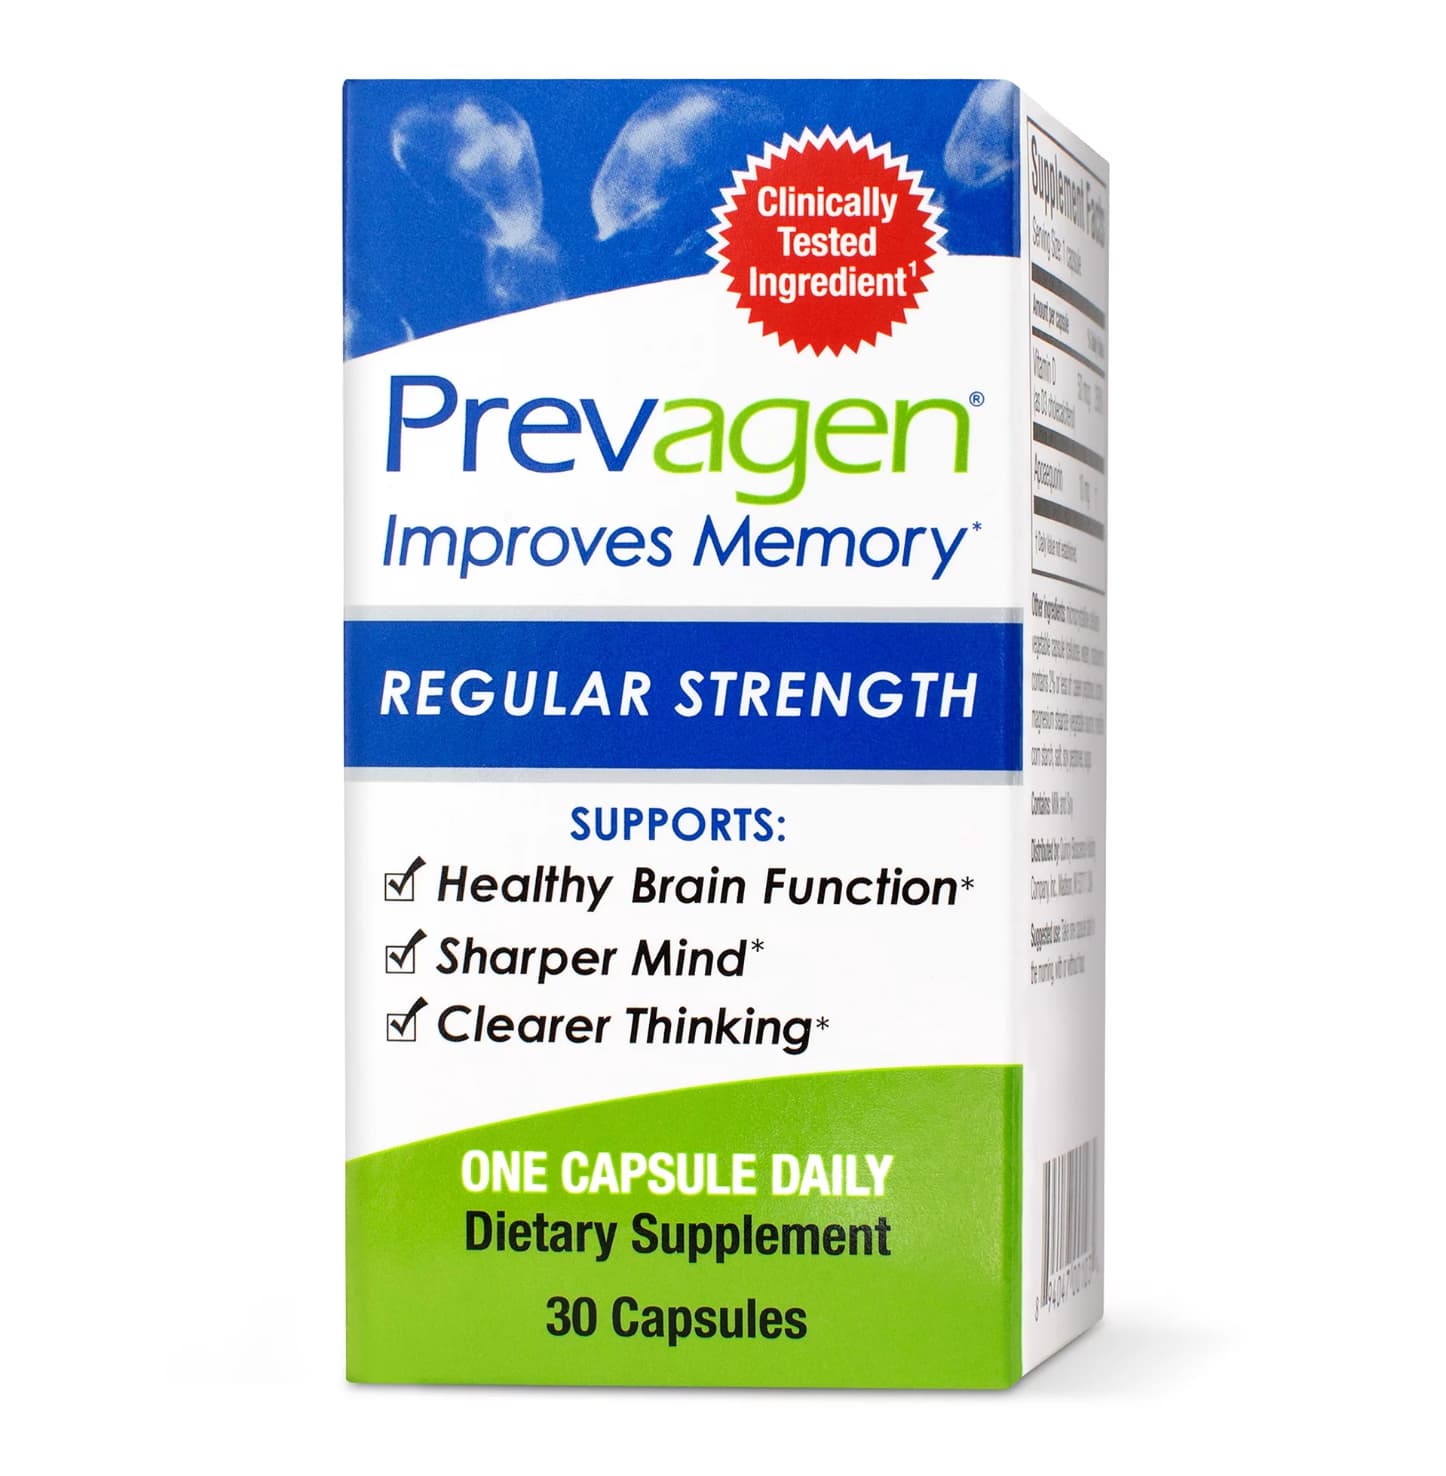 prevagen regular strength - Clinically Tested Ingredient Prevagen Improves Memory Regular Strength Supports Healthy Brain Function Sharper Mind Clearer Thinking One Capsule Daily Dietary Supplement 30 Capsules